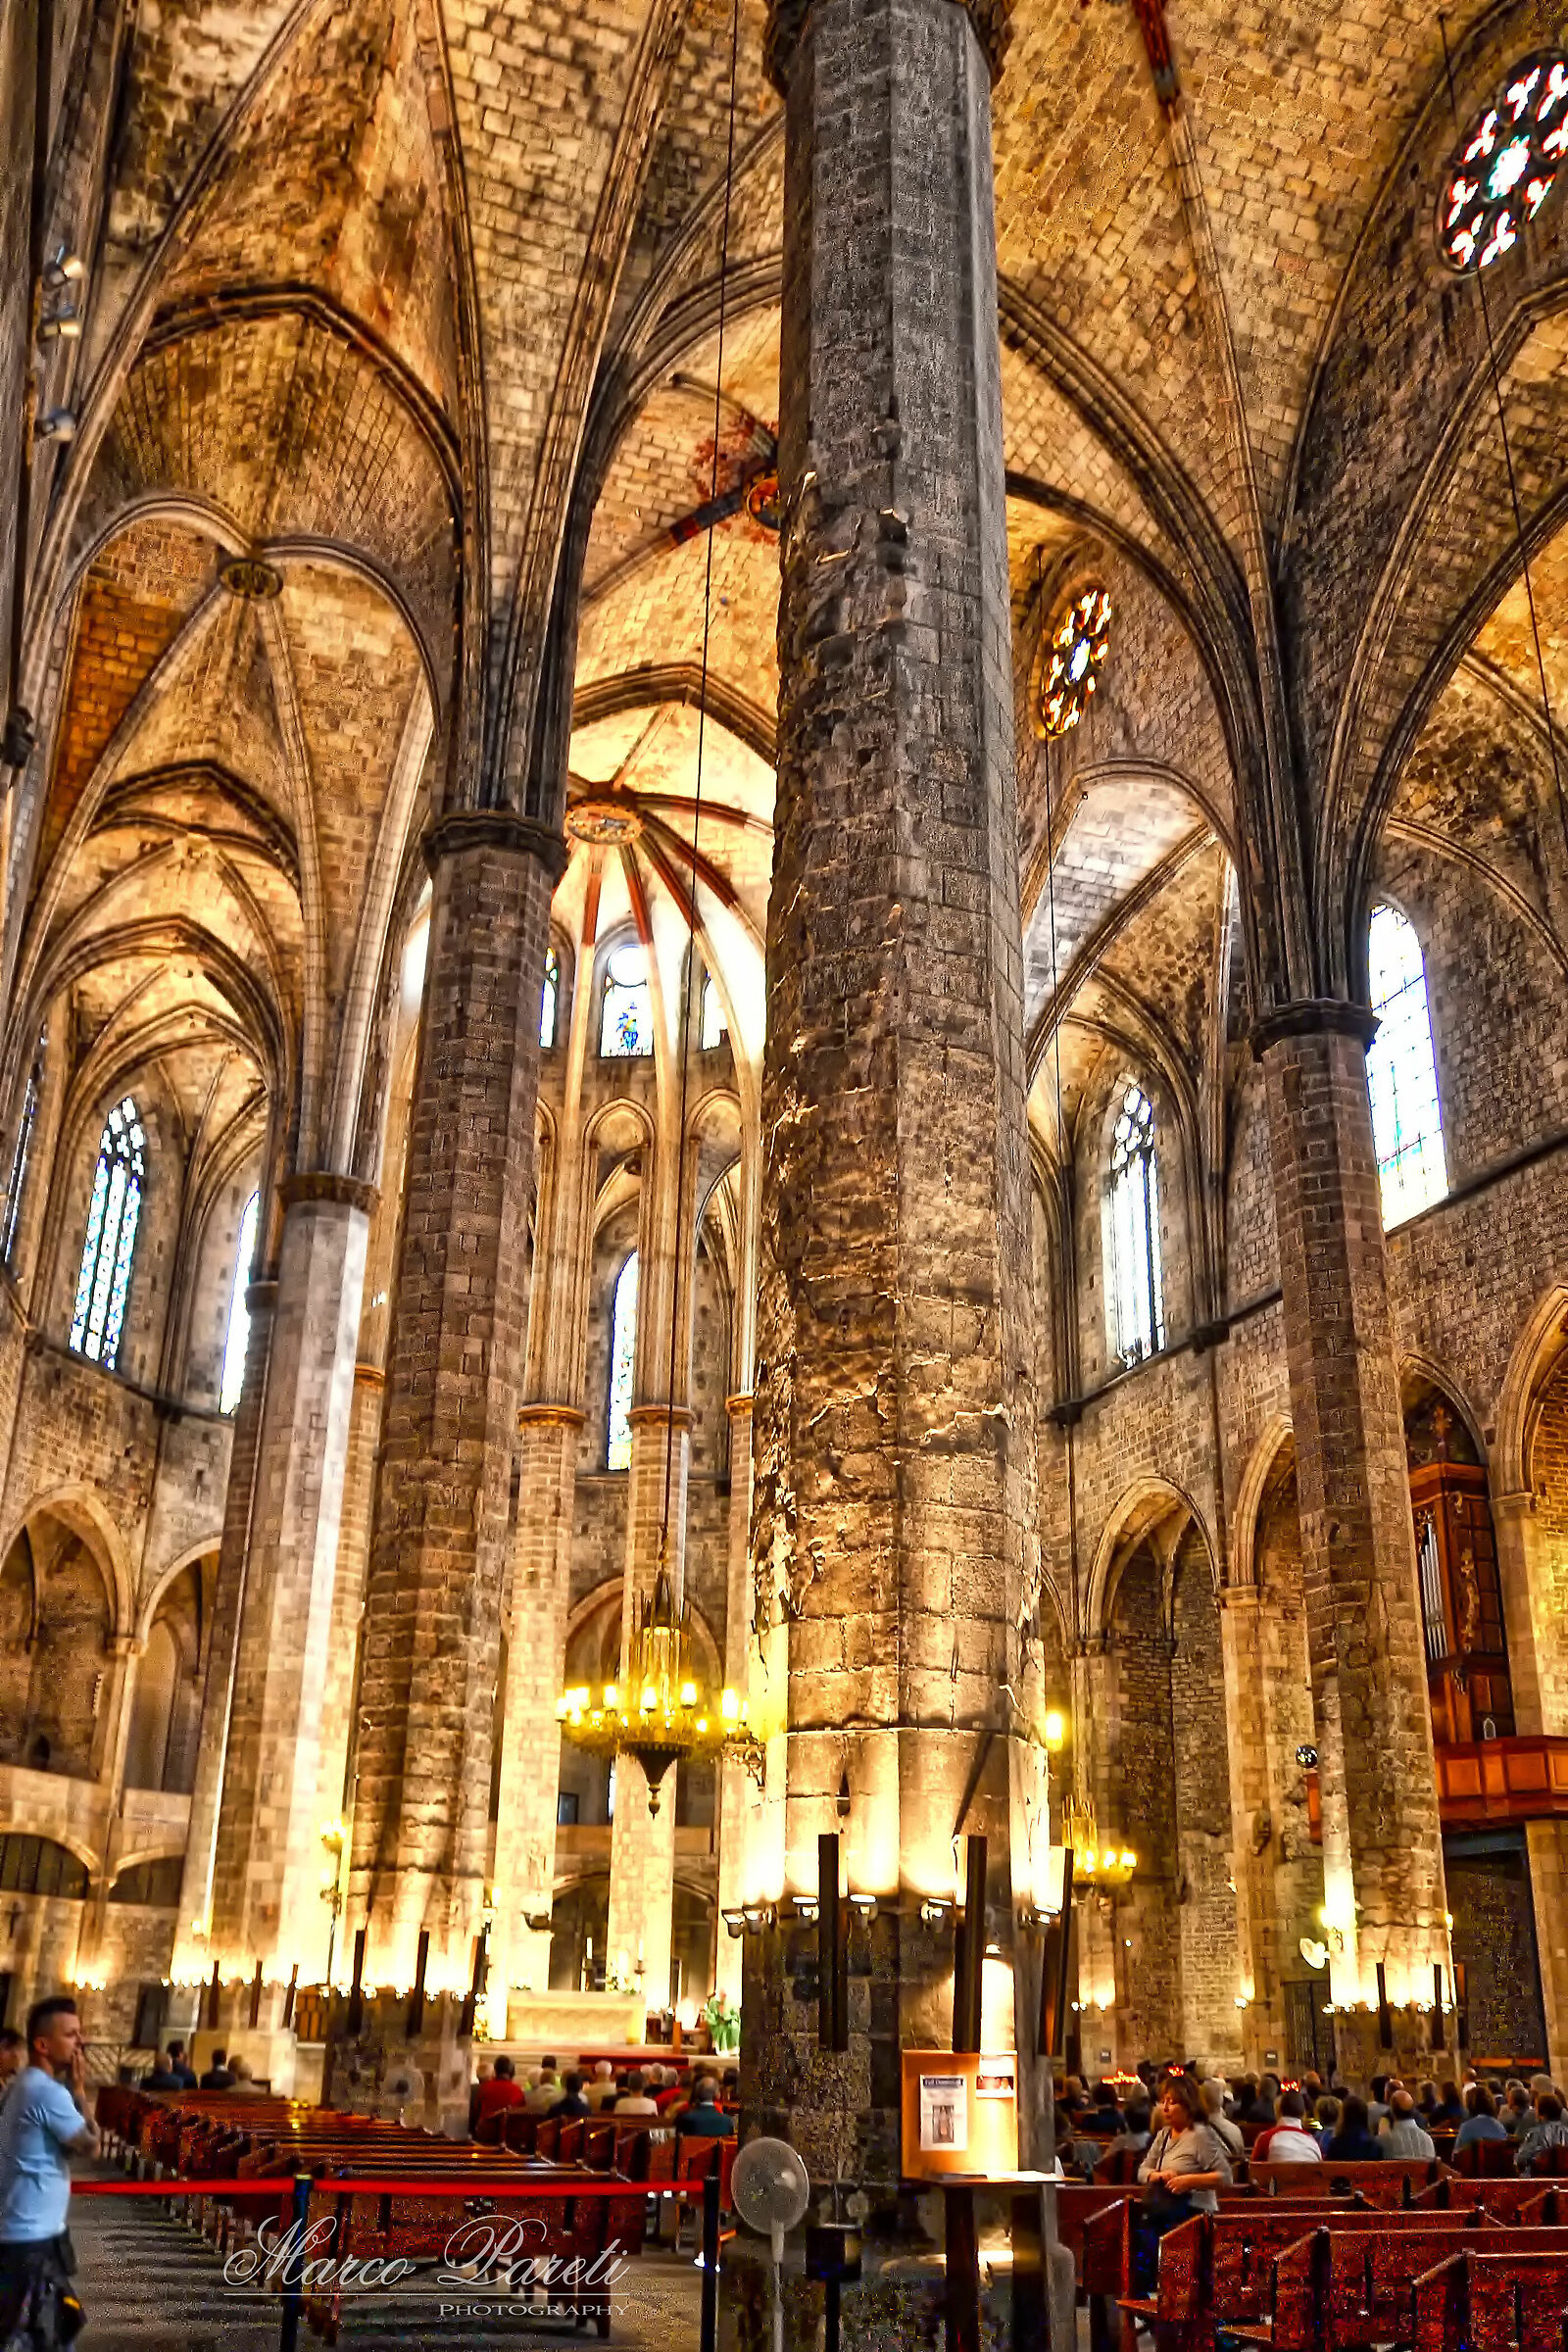 The Cathedral of the Sea - interior...